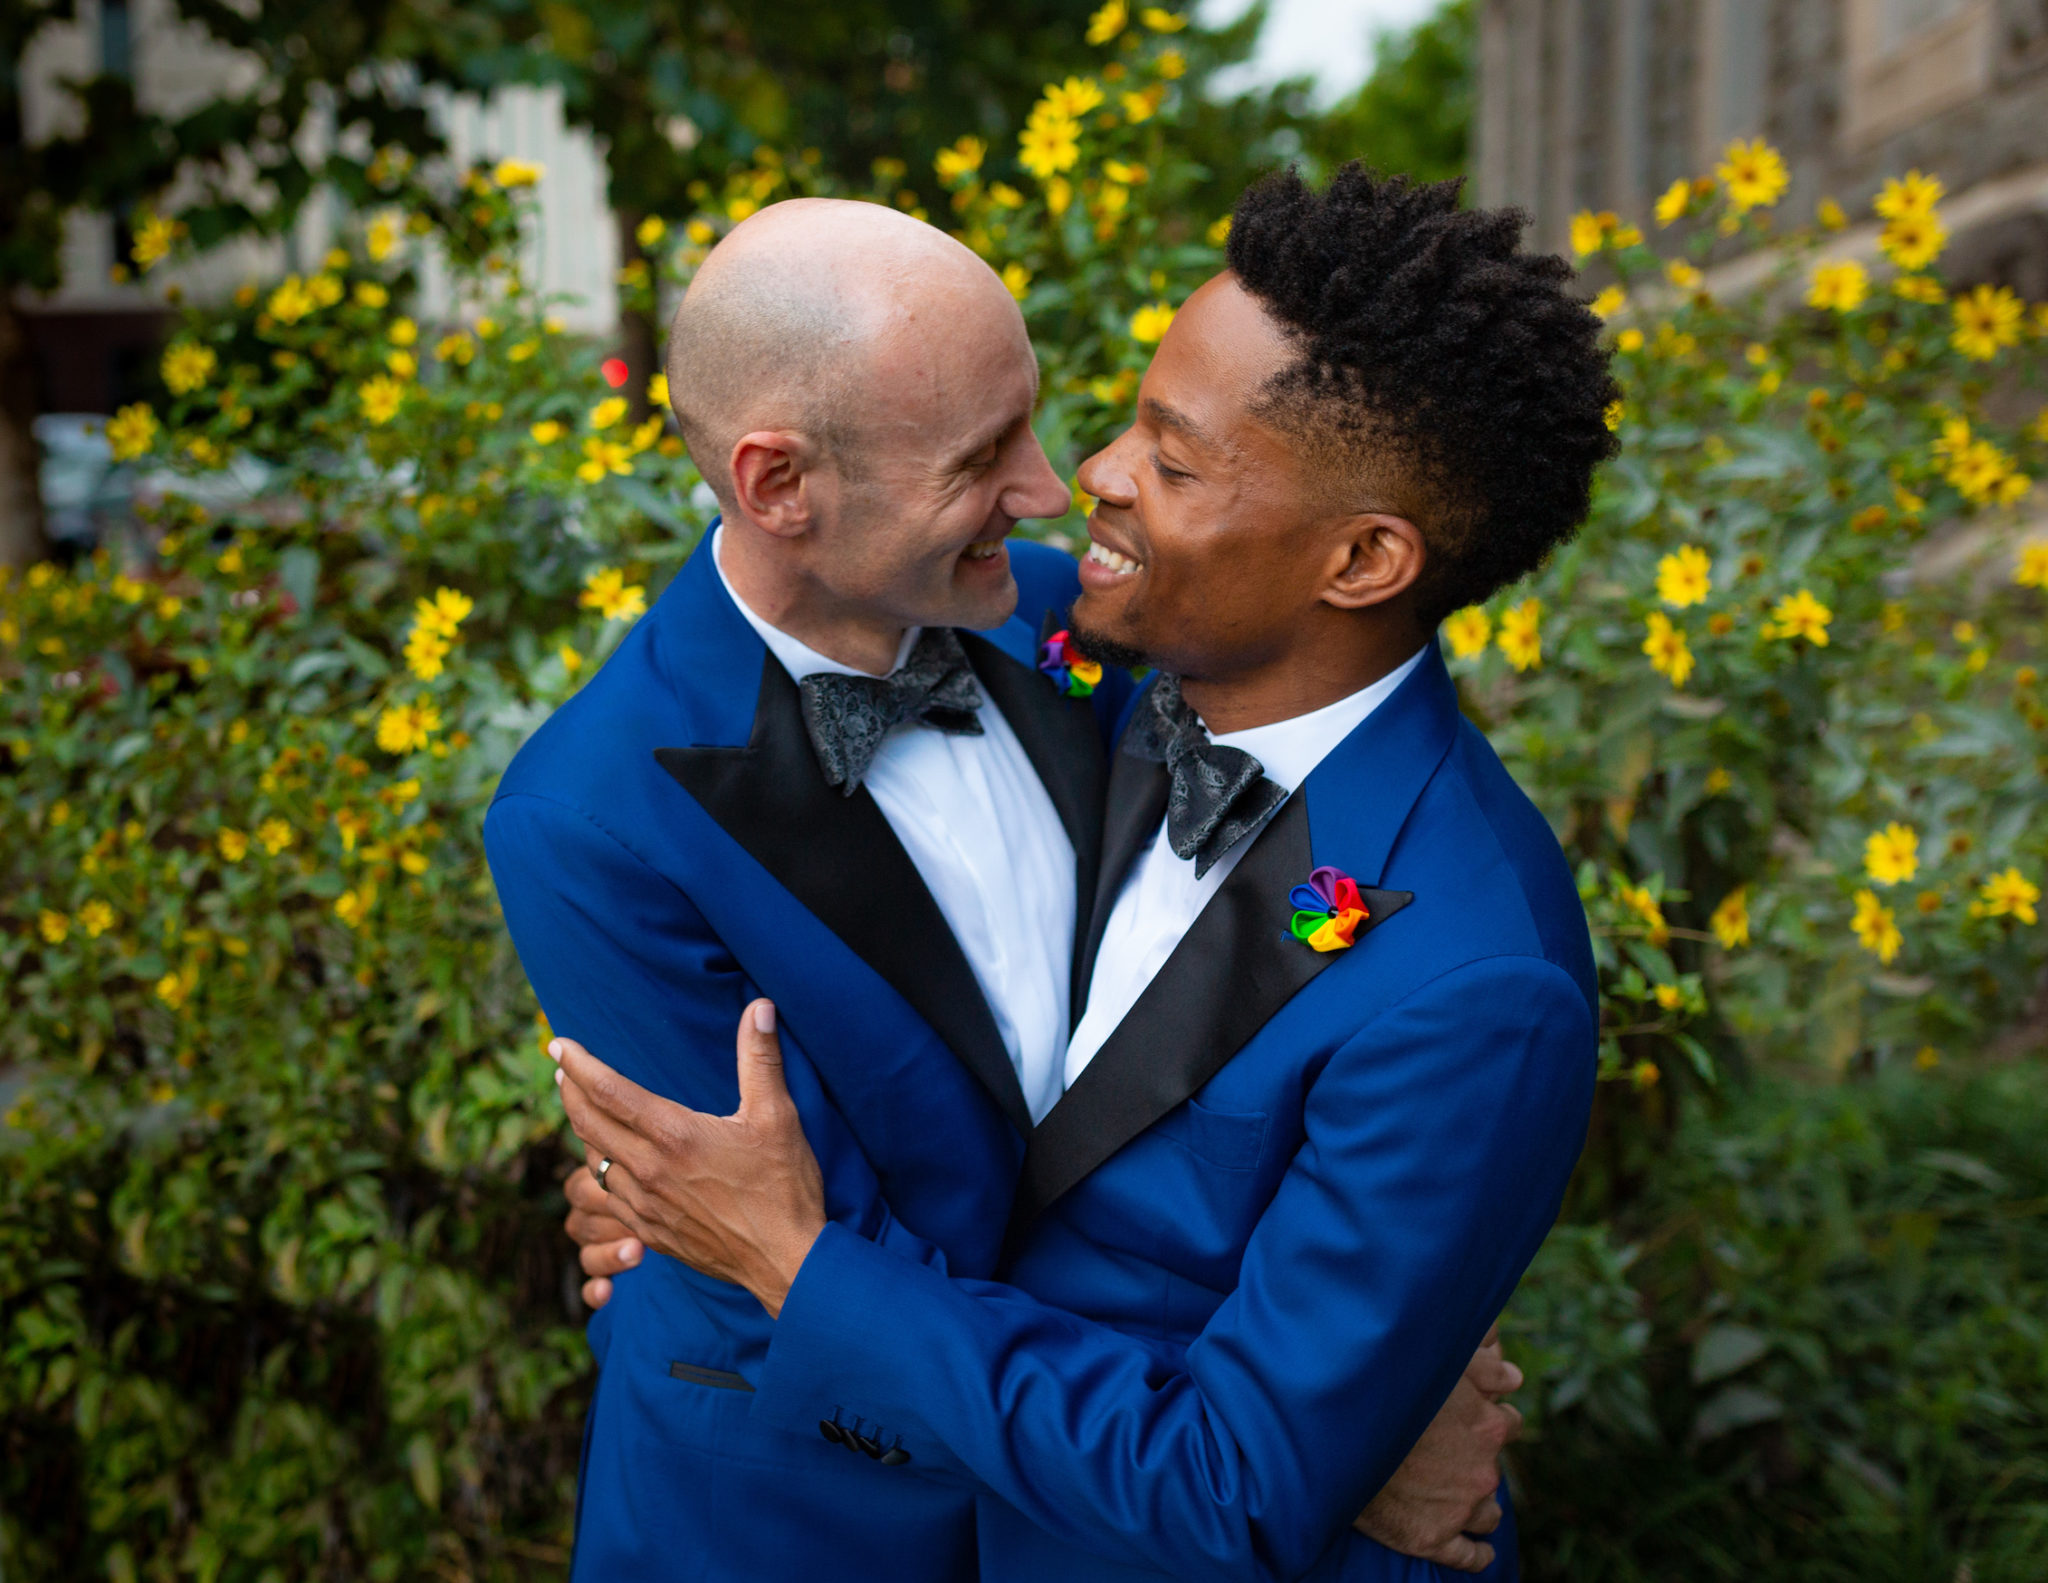 Two men embrace on their wedding day.